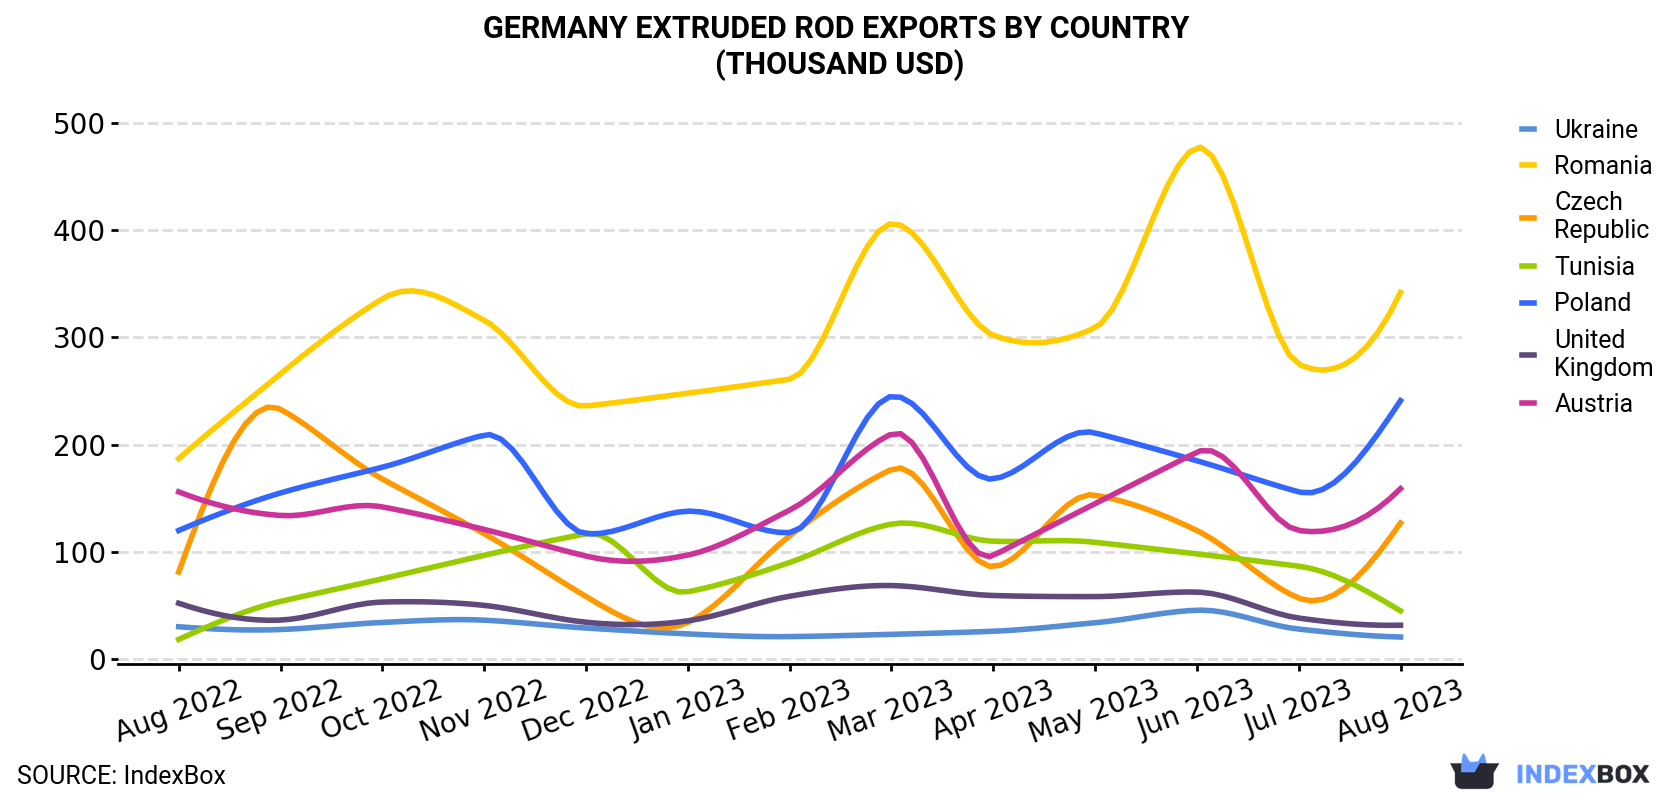 Germany Extruded Rod Exports By Country (Thousand USD)